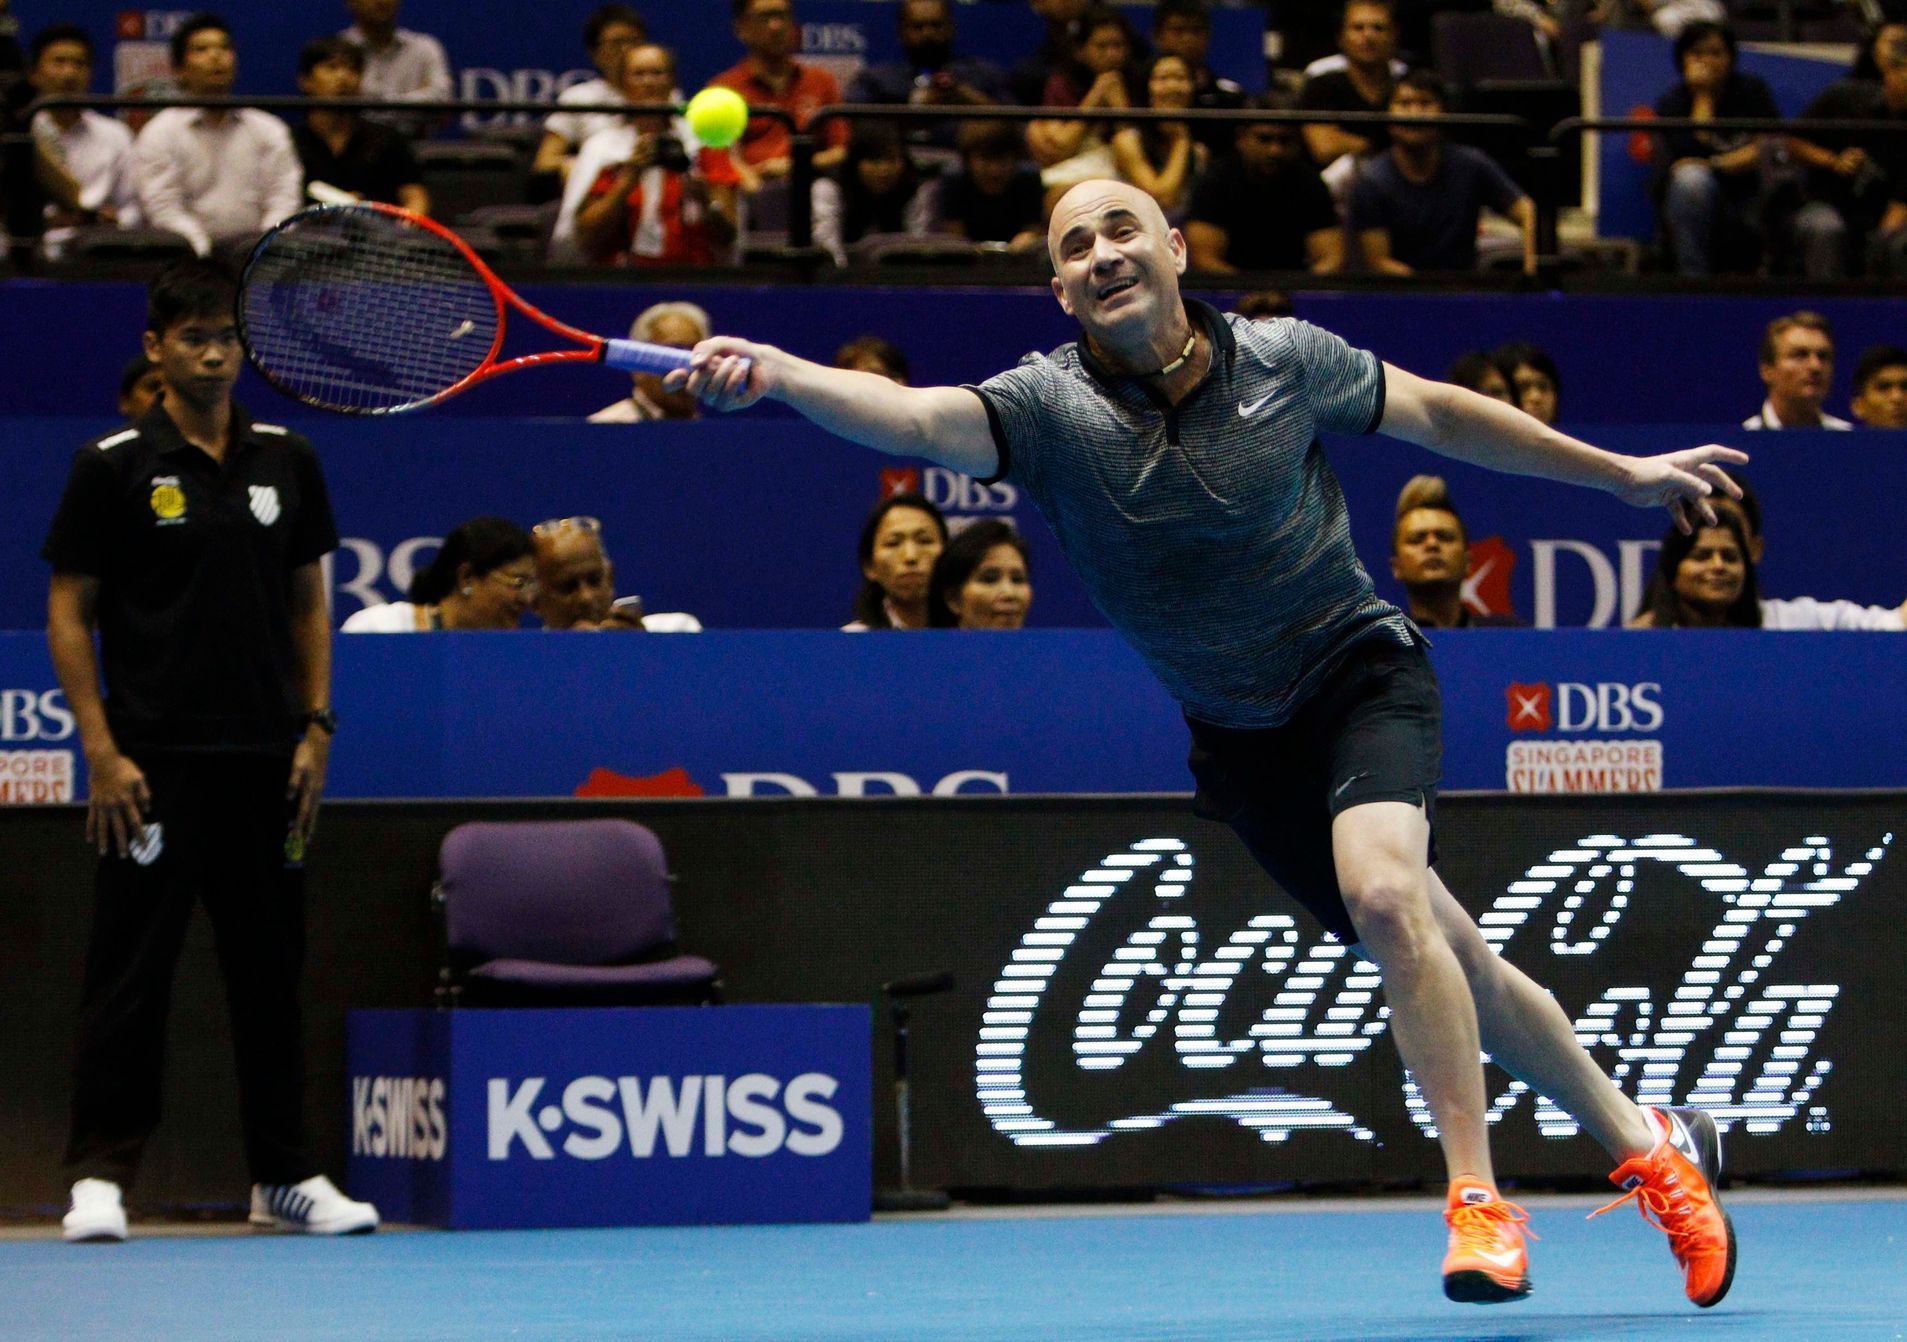 Singapore Slammers' Andre Agassi of the U.S. hits a return to Manila Mavericks' Mark Philippoussis of Australia during their men's singles match at the International Premier Tennis League (IPTL) in Si